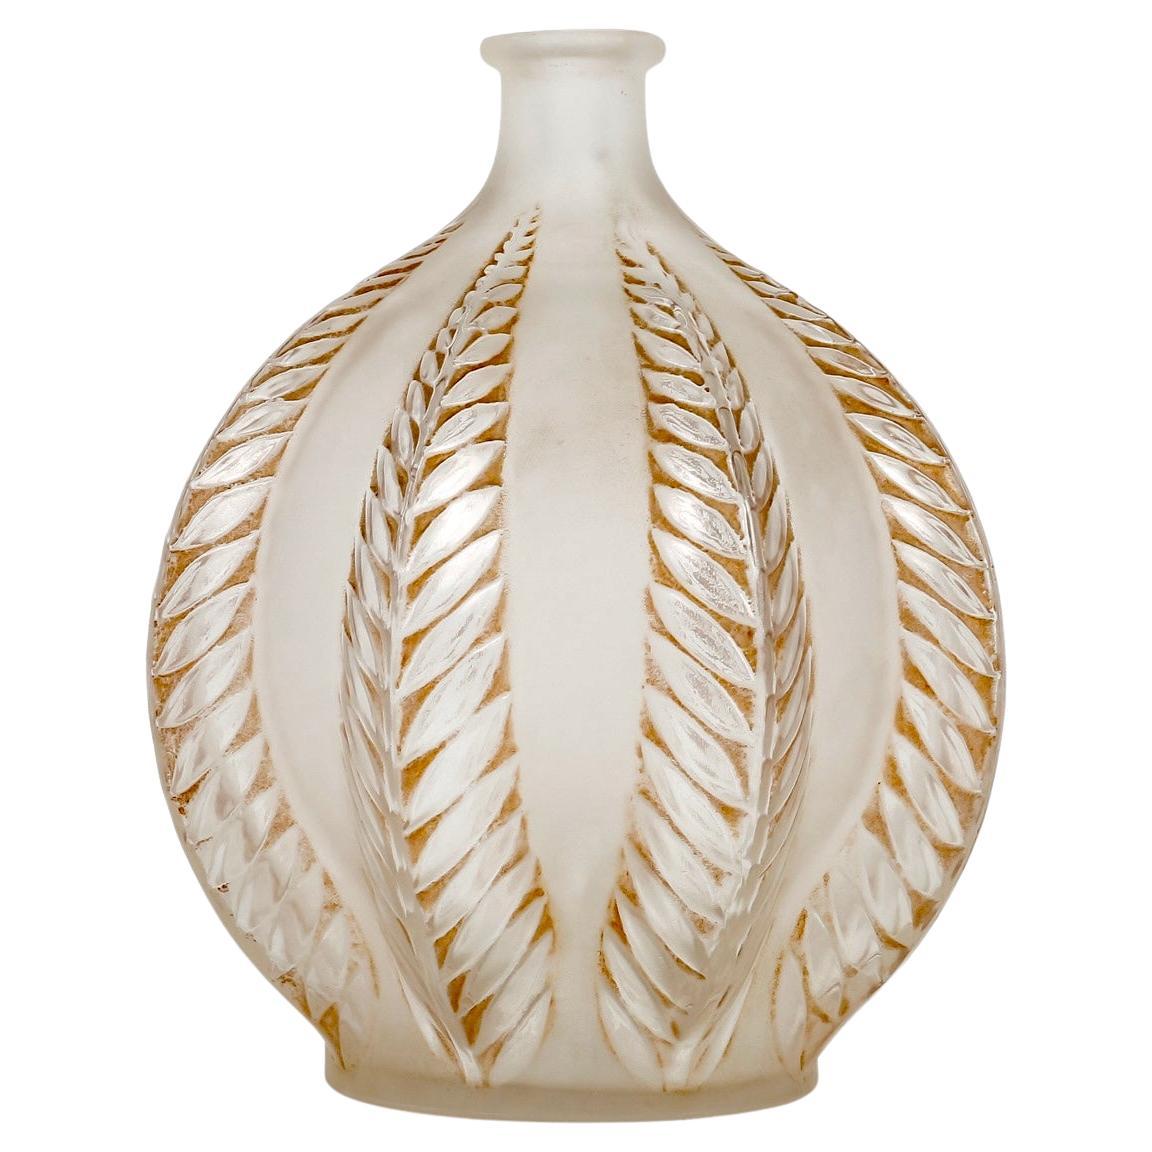 1924 René Lalique, Vase Malines Frosted Glass with Sepia Patina